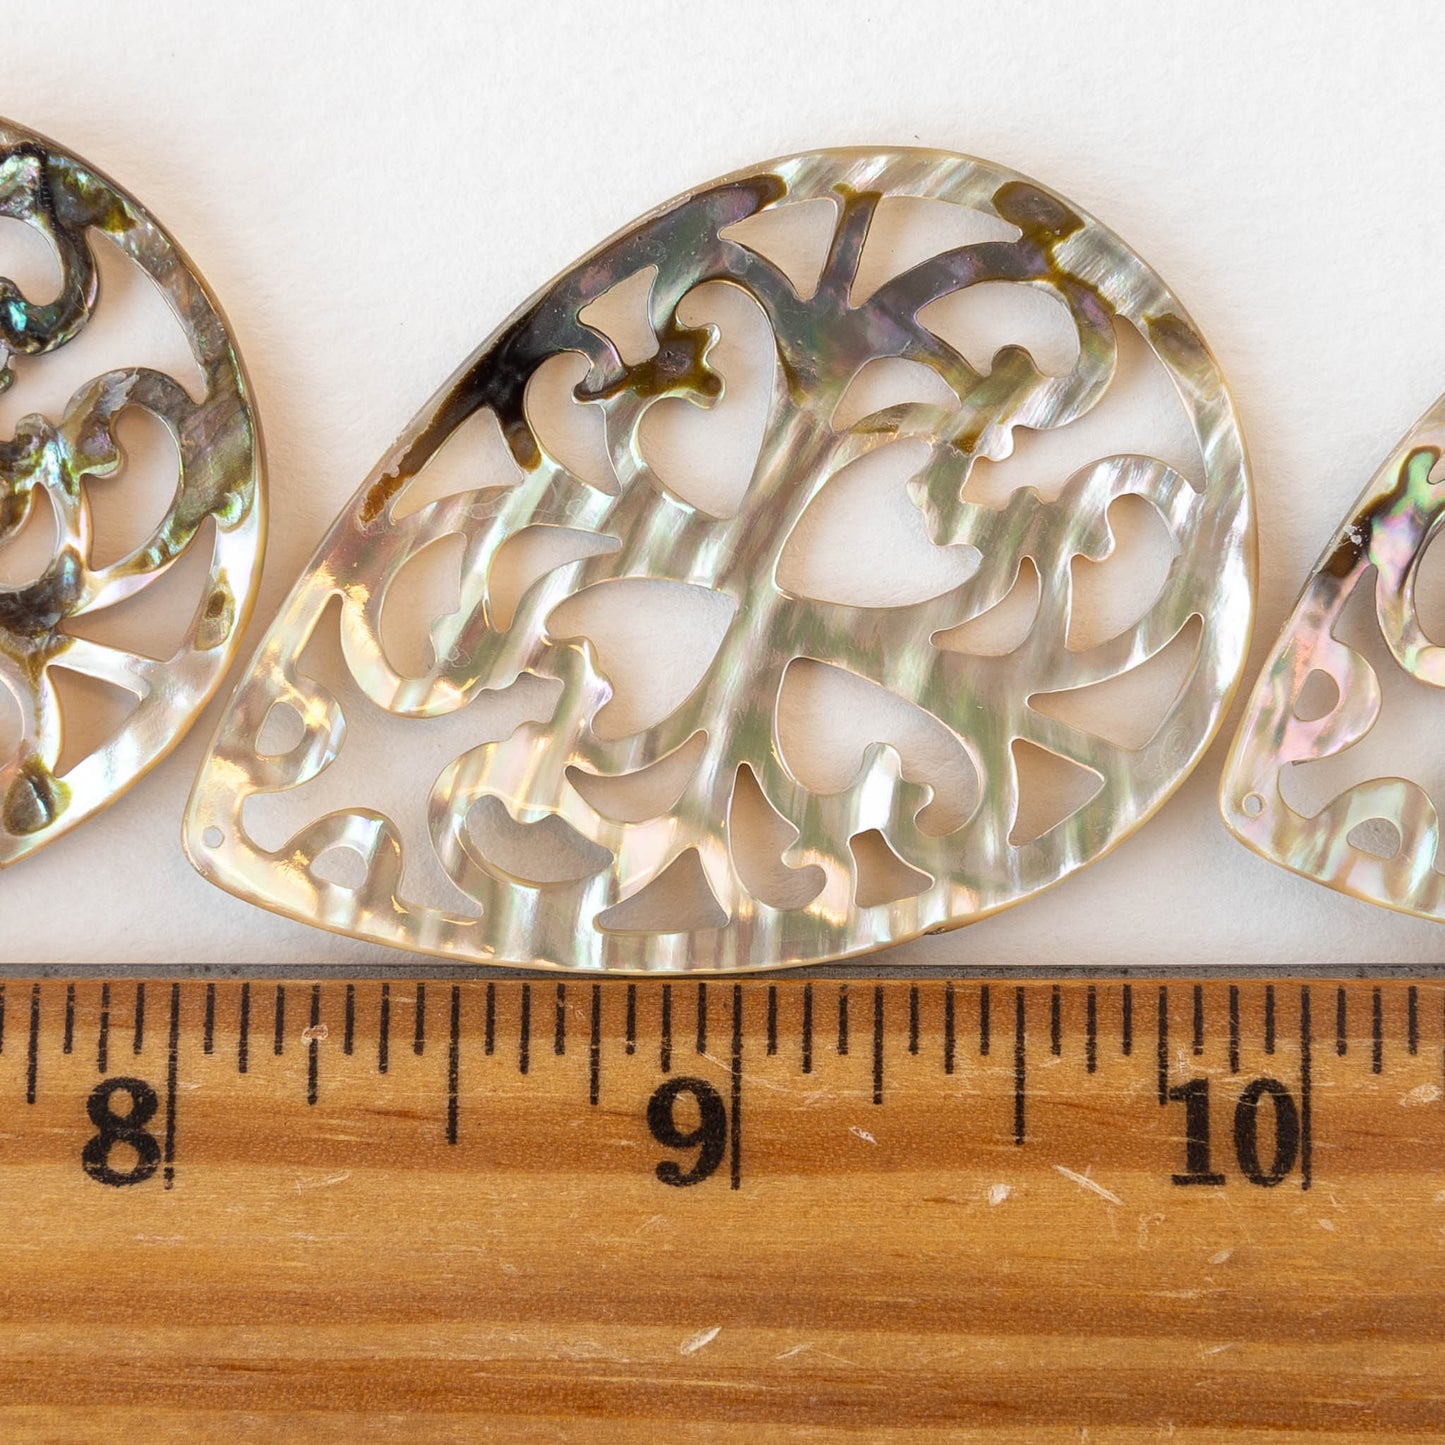 35x50mm Carved Abalone Teardrop Shell Pendants - 1 Pair